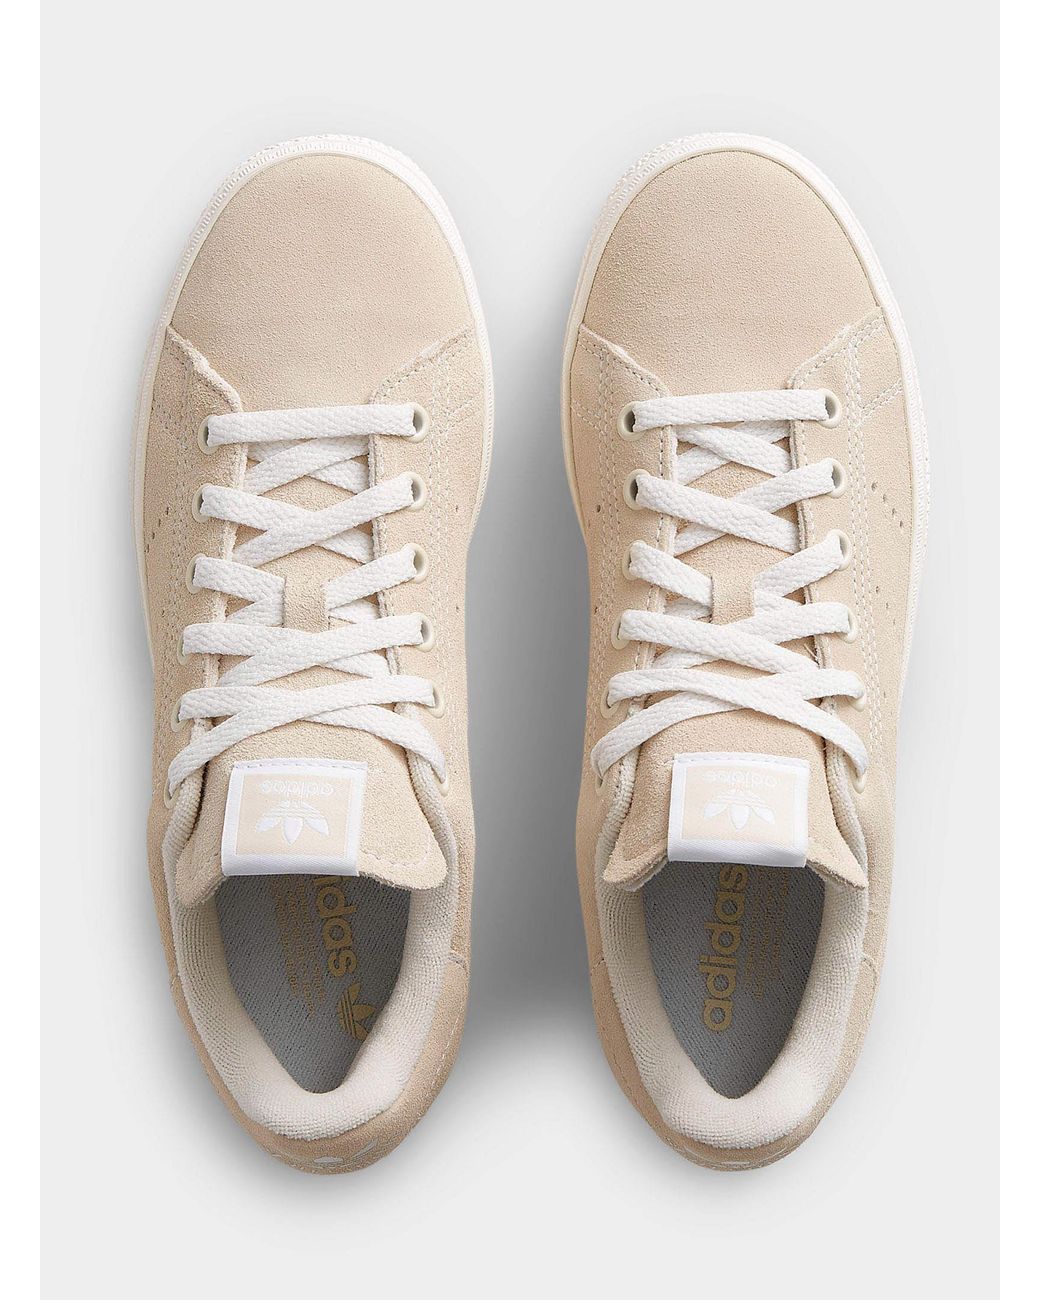 Women's Sneakers in Suede and Leather in Beige | TONI PONS